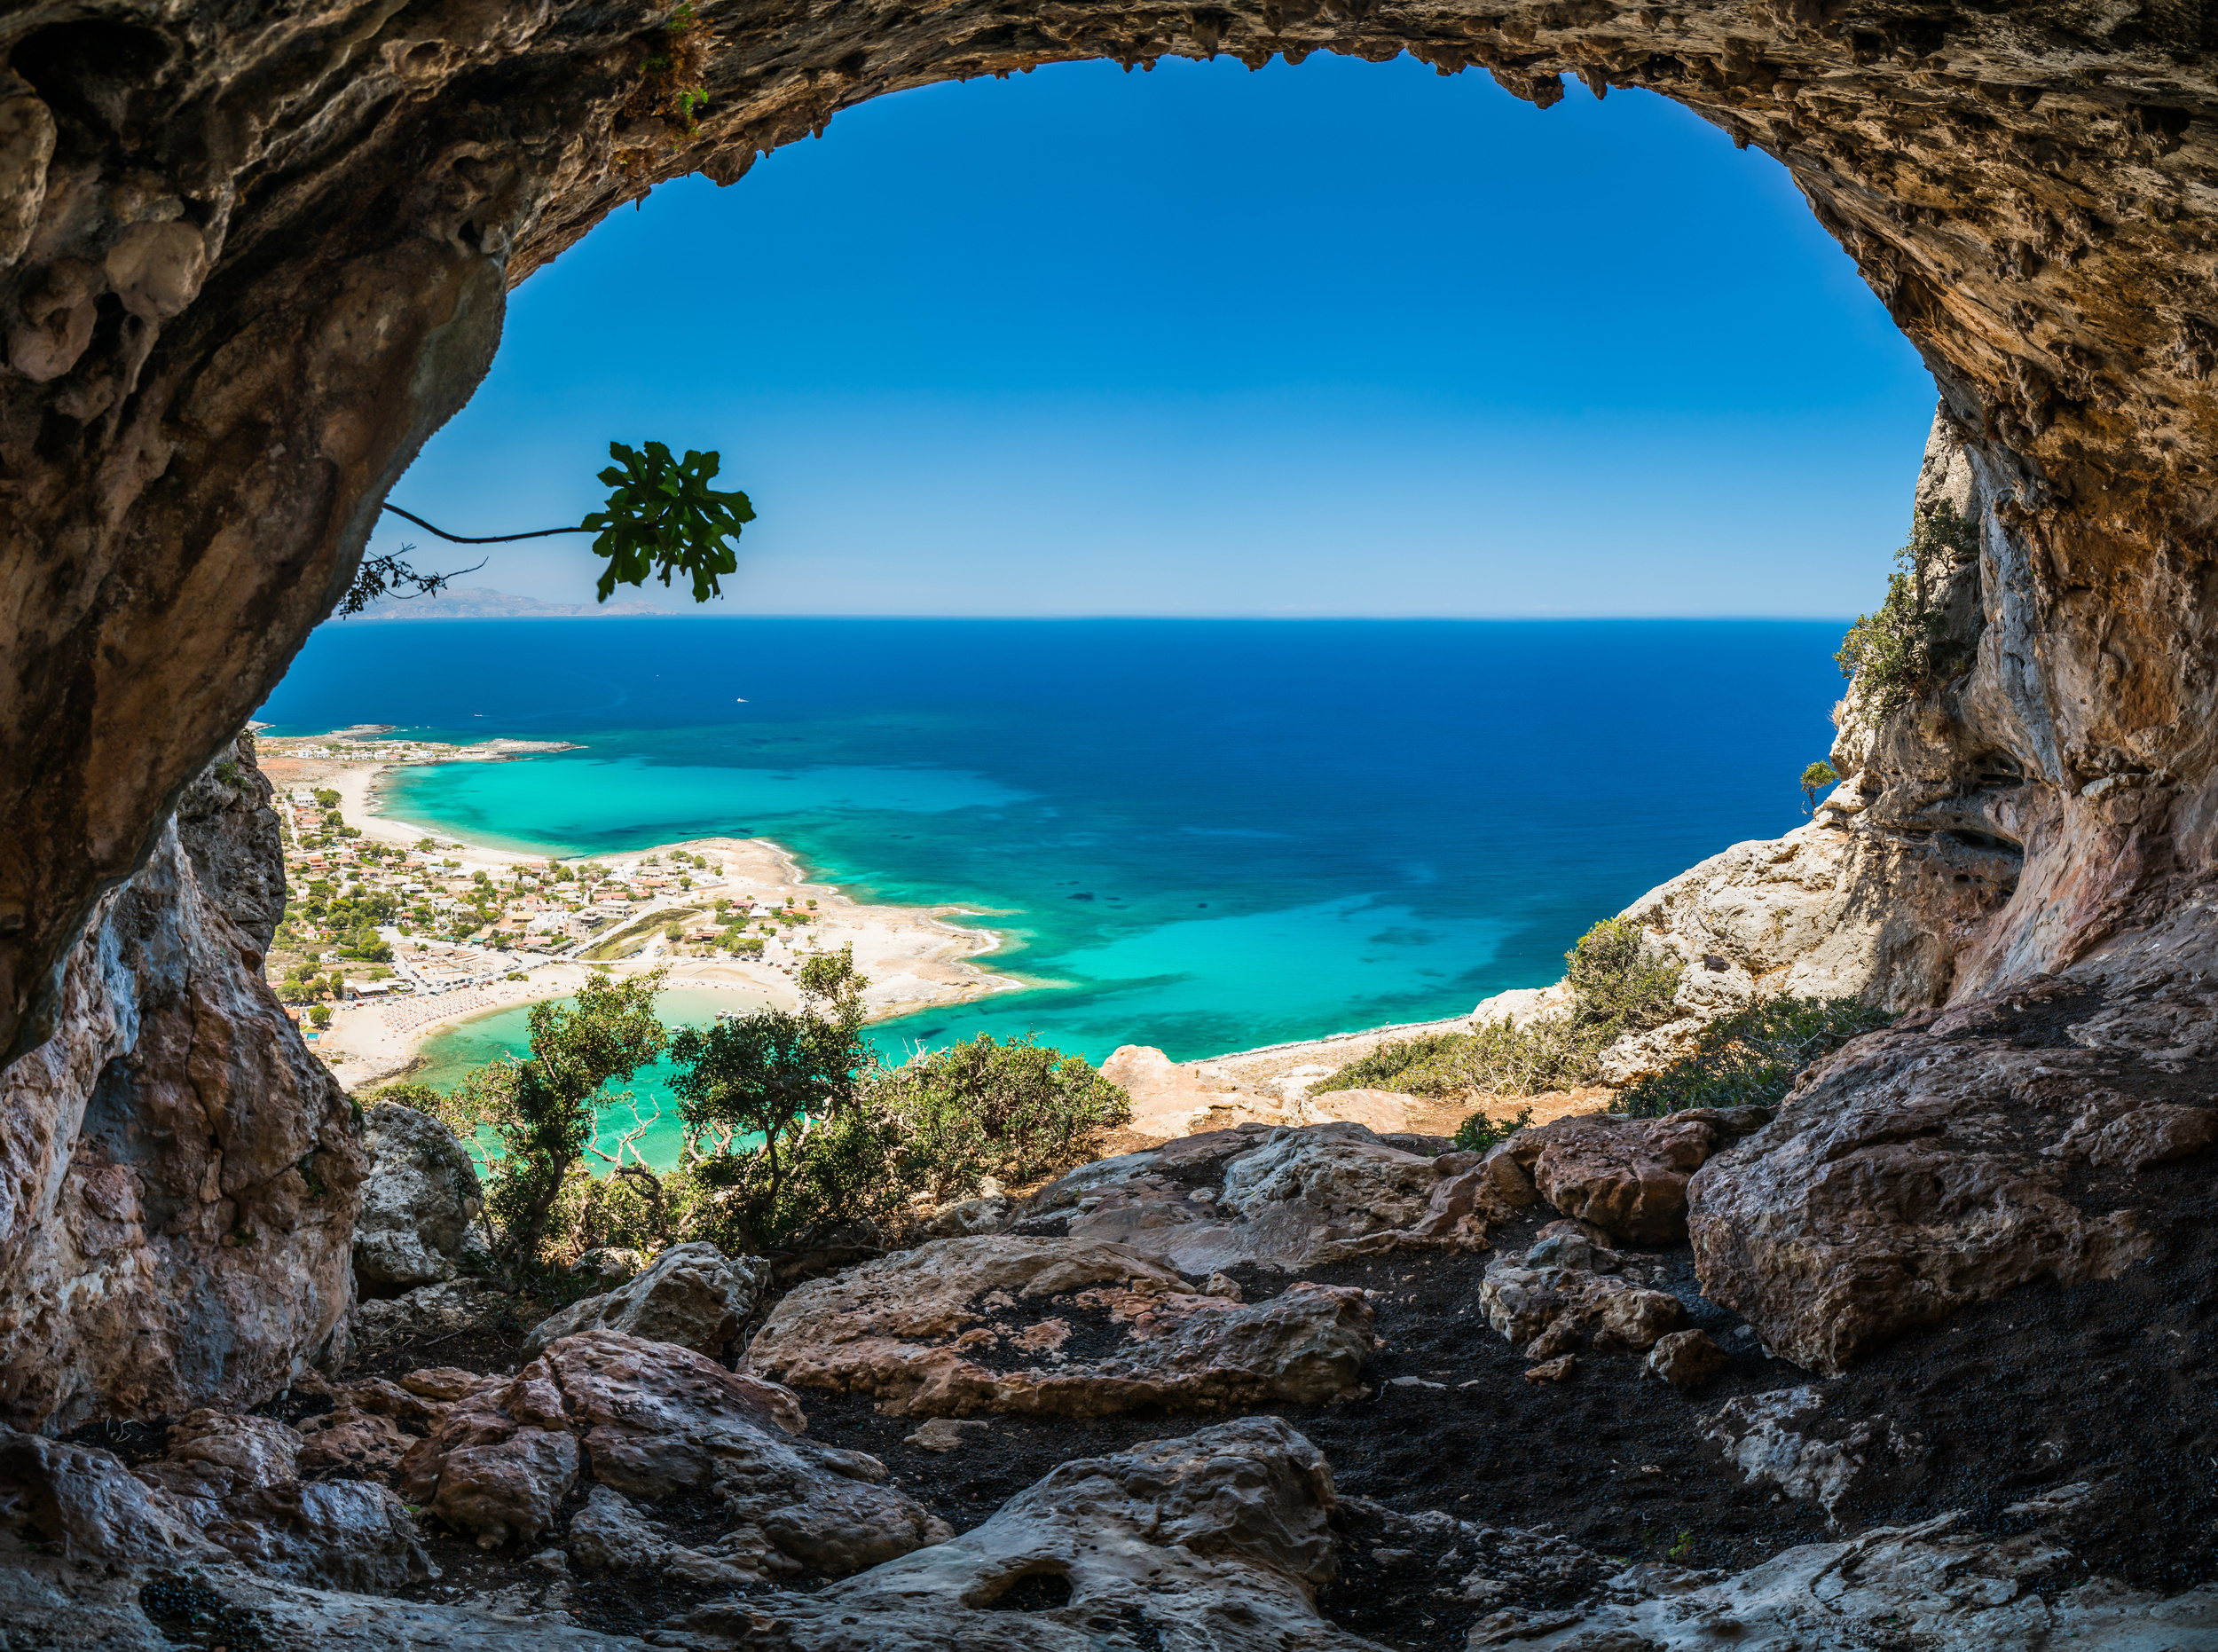 <p>Everyone envisions the ideal Mediterranean getaway as island-hopping in Greece. From the most famous islands like Santorini and Mykonos to lesser-known gems such as Paros, Zakynthos, and Hydra, you’re sure to have a great vacation.</p><p>You may also like: <a href='https://www.yardbarker.com/lifestyle/articles/20_random_things_that_are_normal_in_europe_but_weird_in_the_usa_031924/s1__39961459'>20 random things that are normal in Europe but weird in the U.S.A.</a></p>